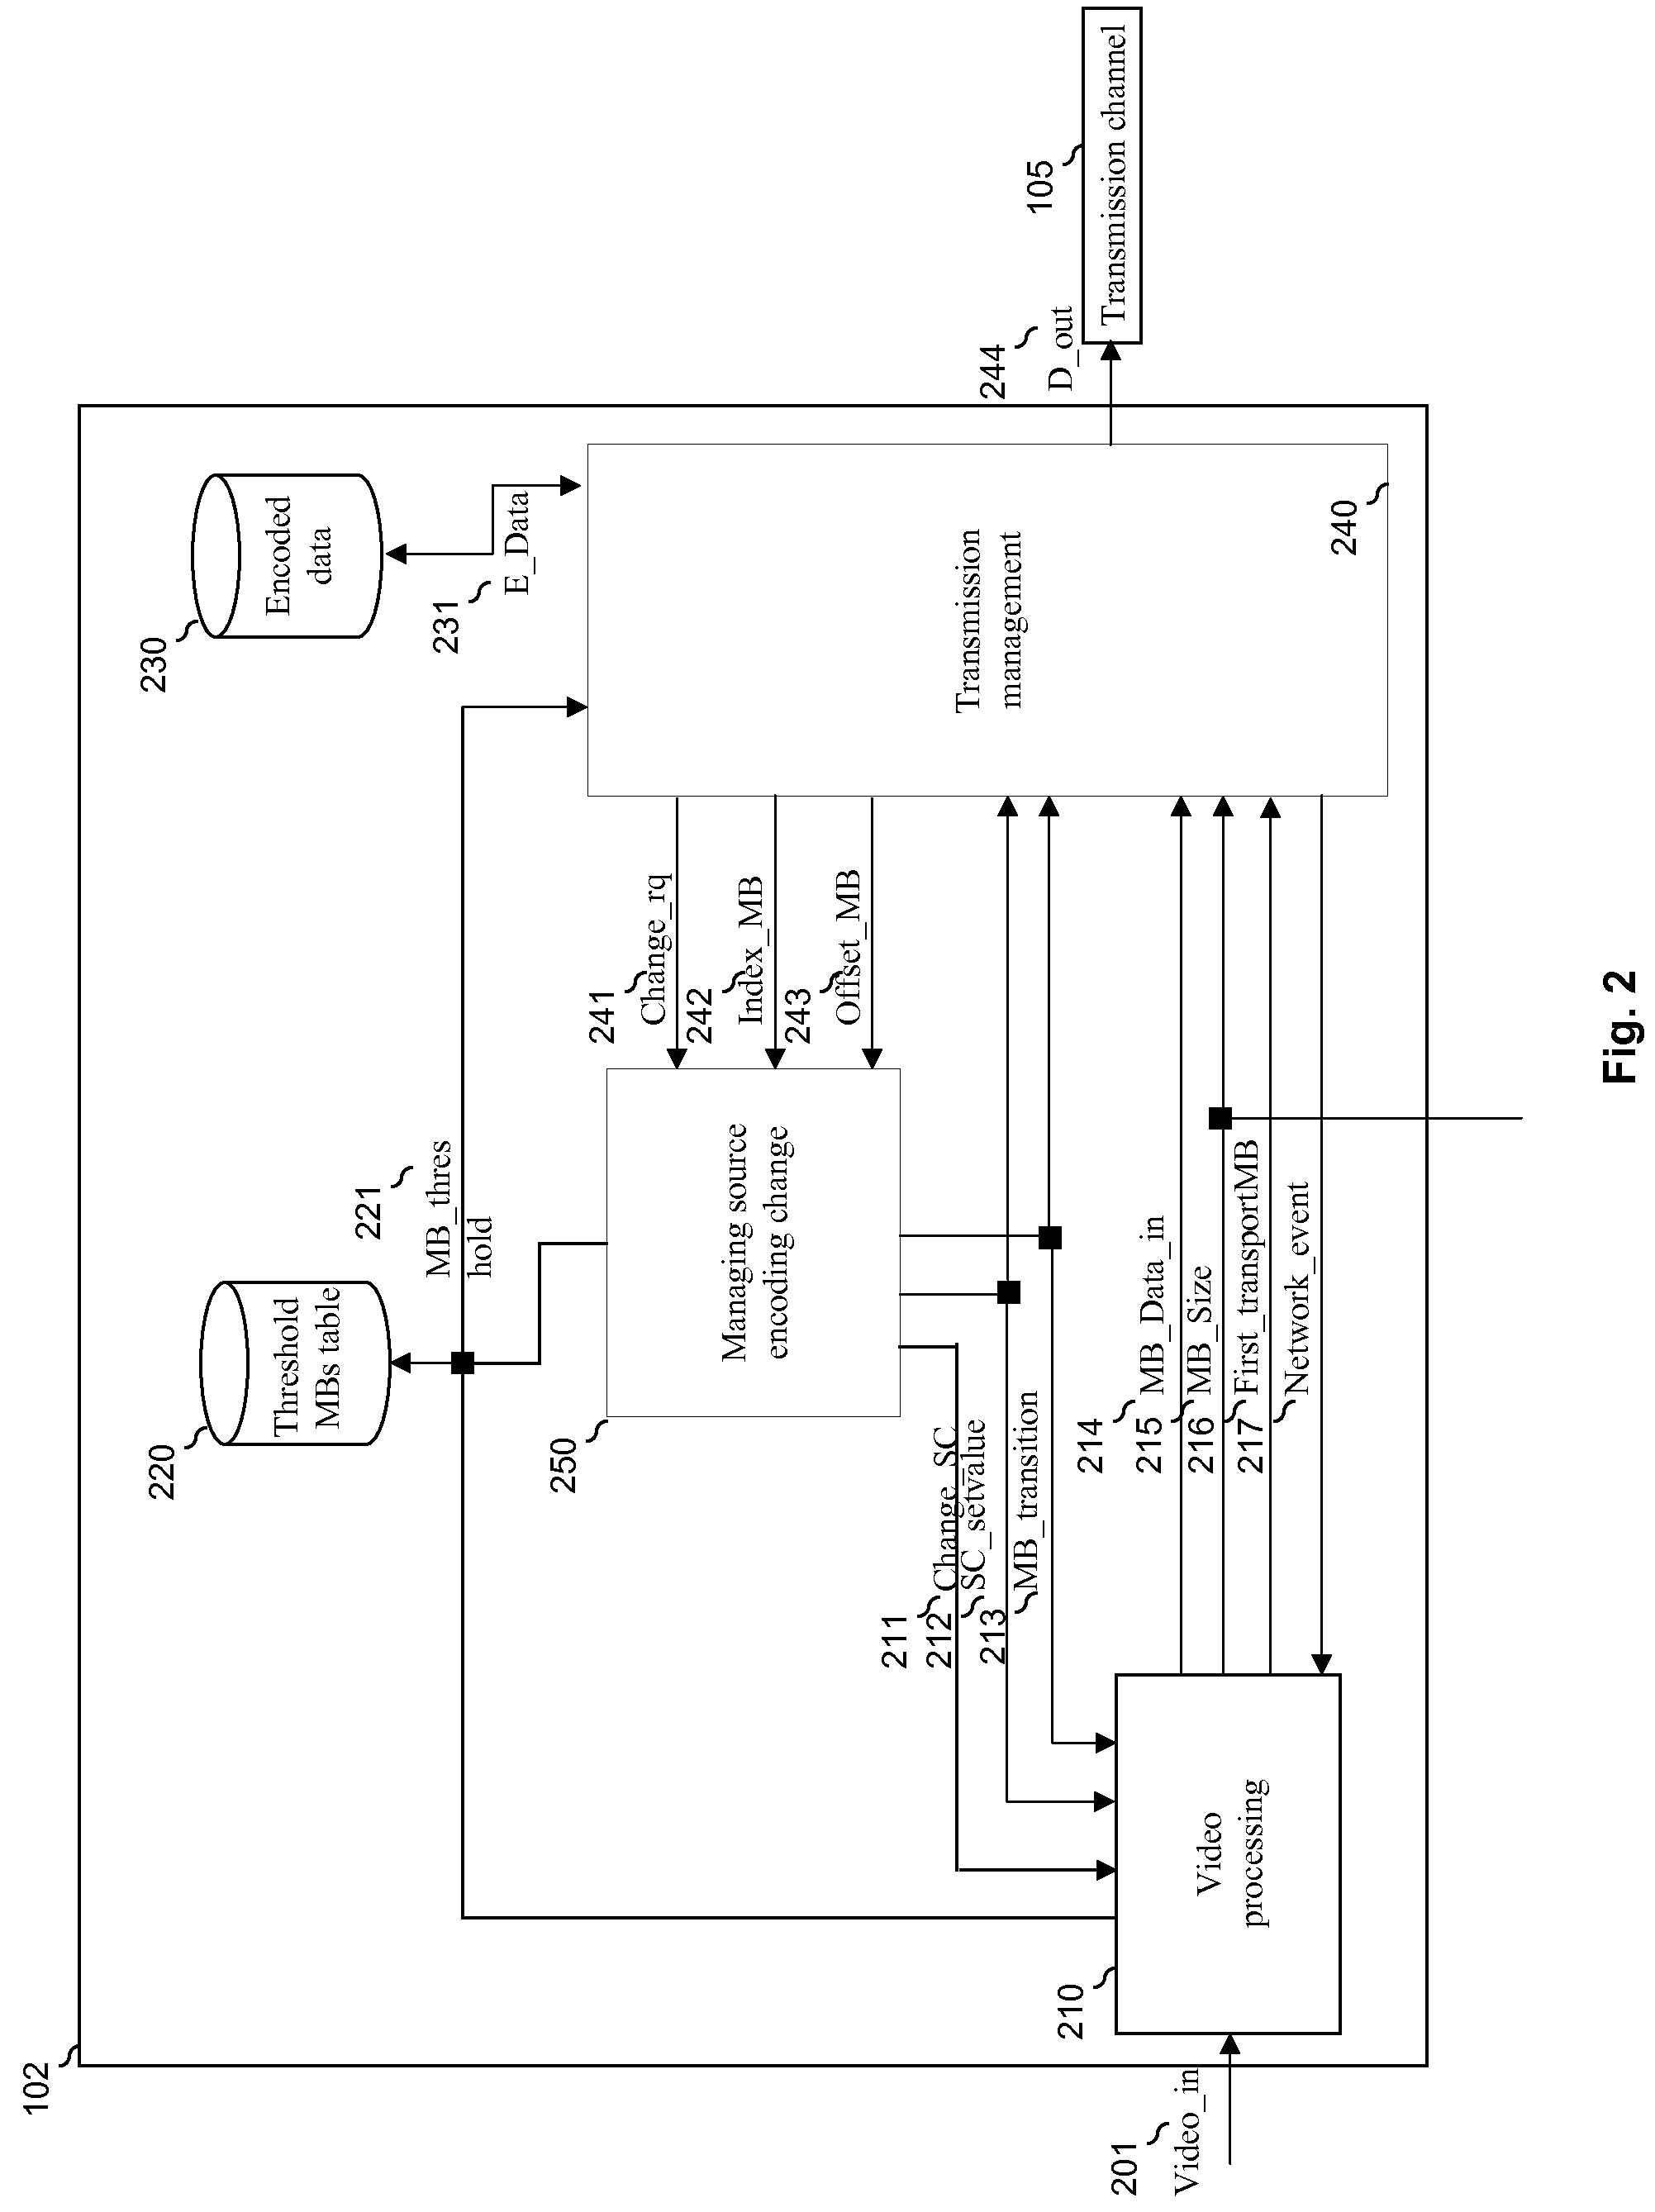 Method for managing a data transmission from a sender device, corresponding computer-readable storage medium and sender device